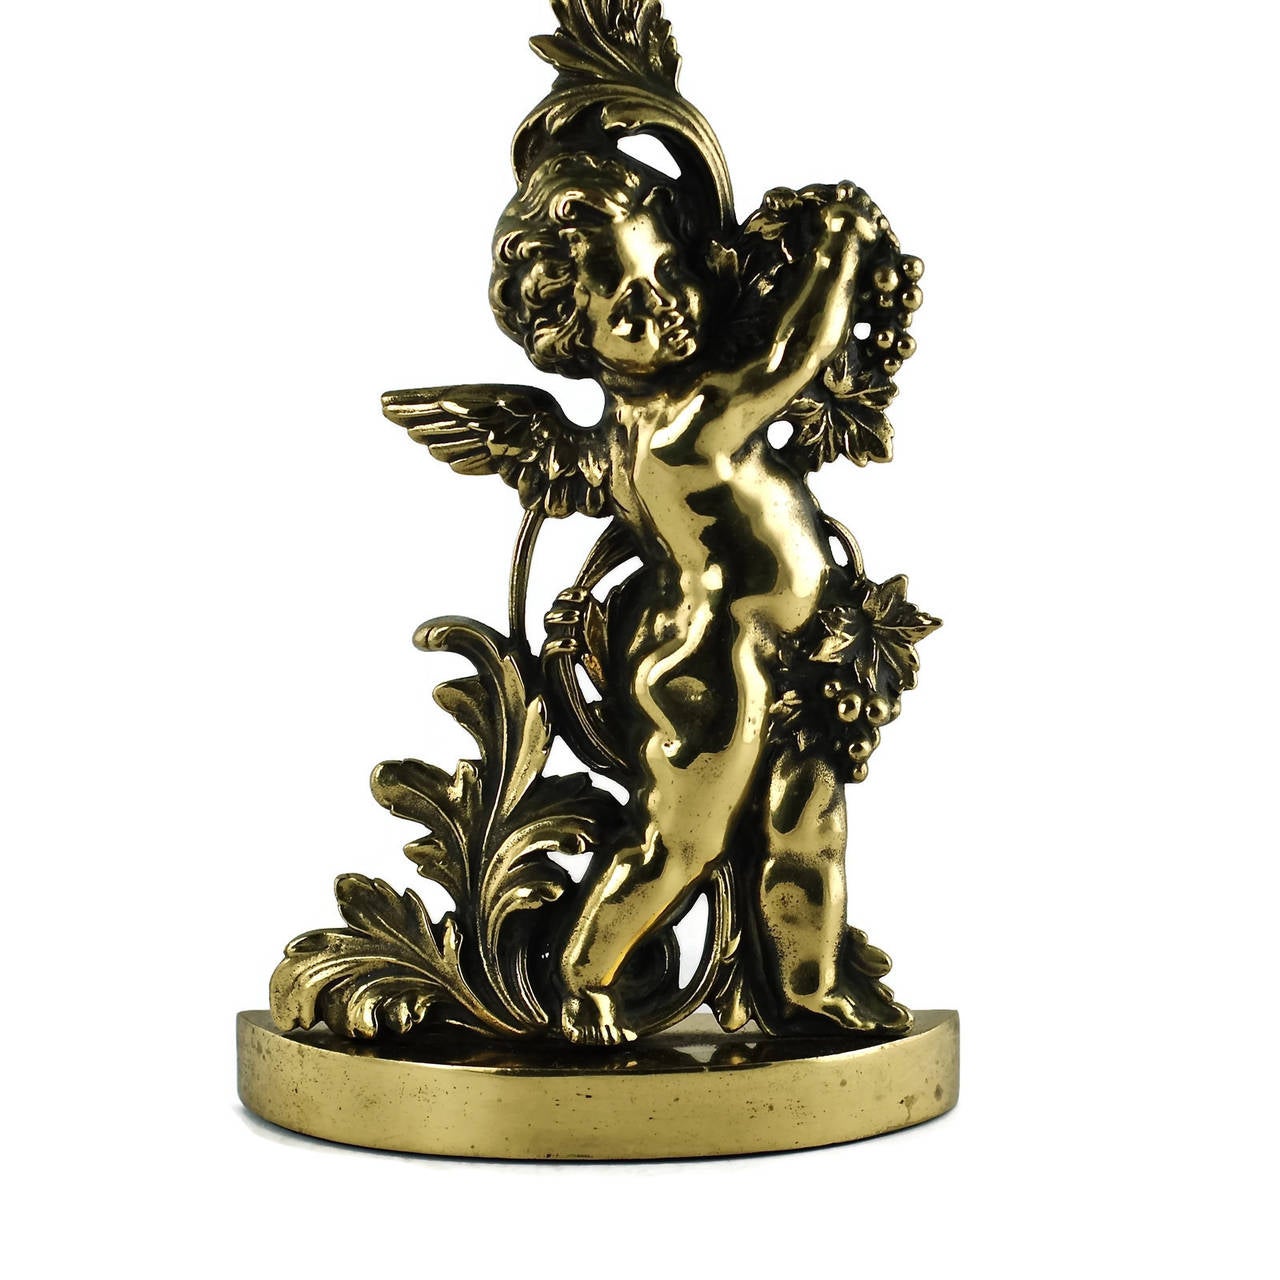 This large late Victorian figural doorstop was made by Peerage of England. The piece is composed of cast brass with a cast iron filled base and has been made in the form of a winged cherub standing on a demilune plinth beside scrolling acanthus